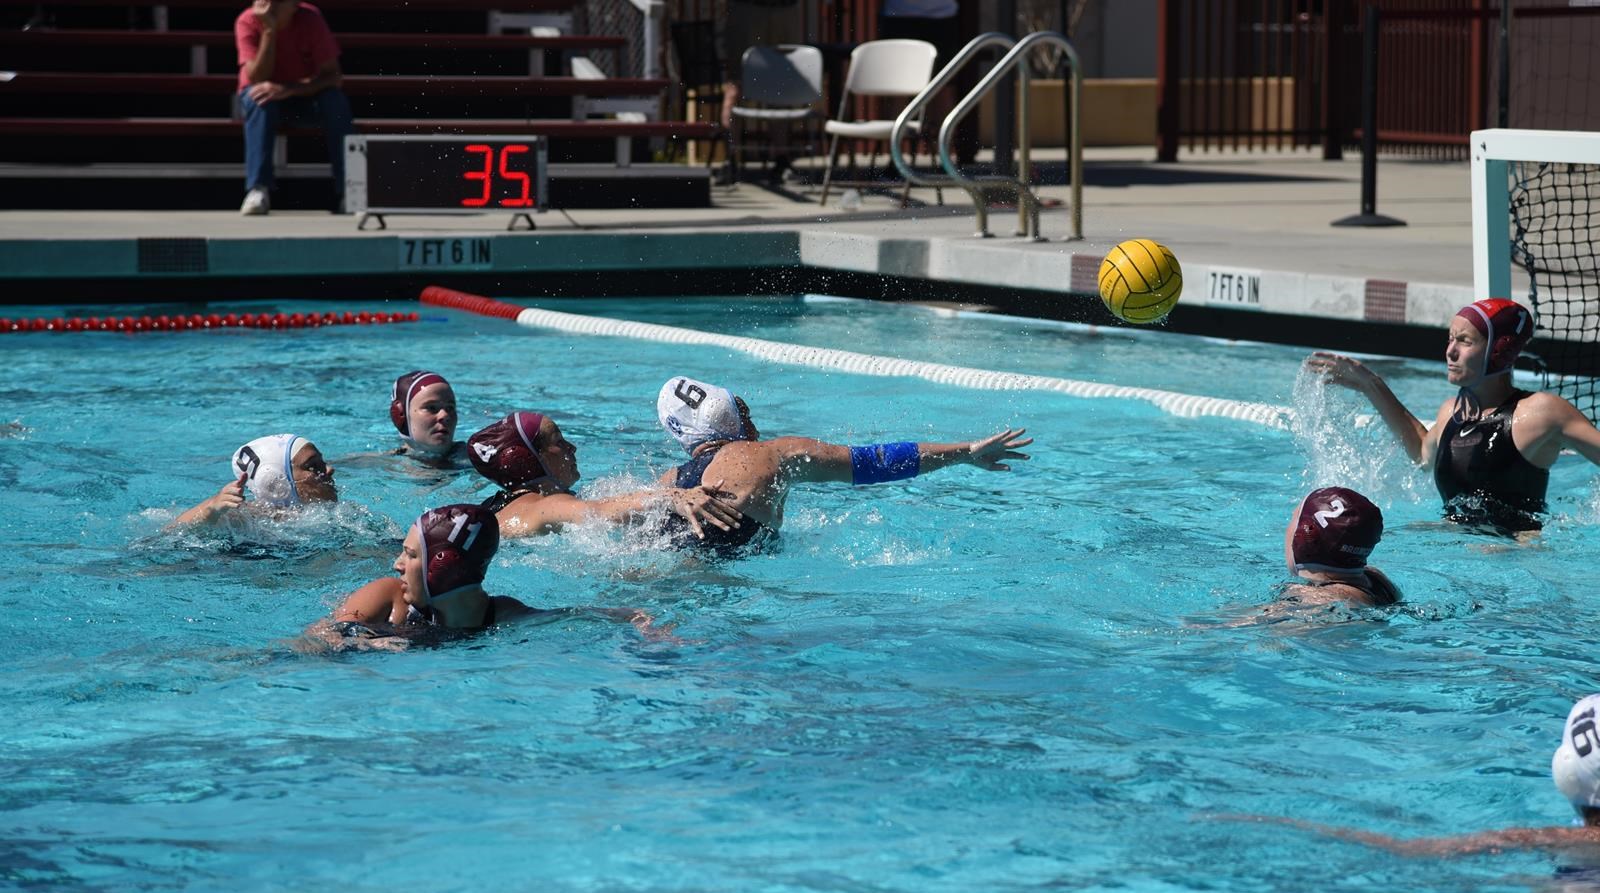 A group of women in a swimming pool playing water polo